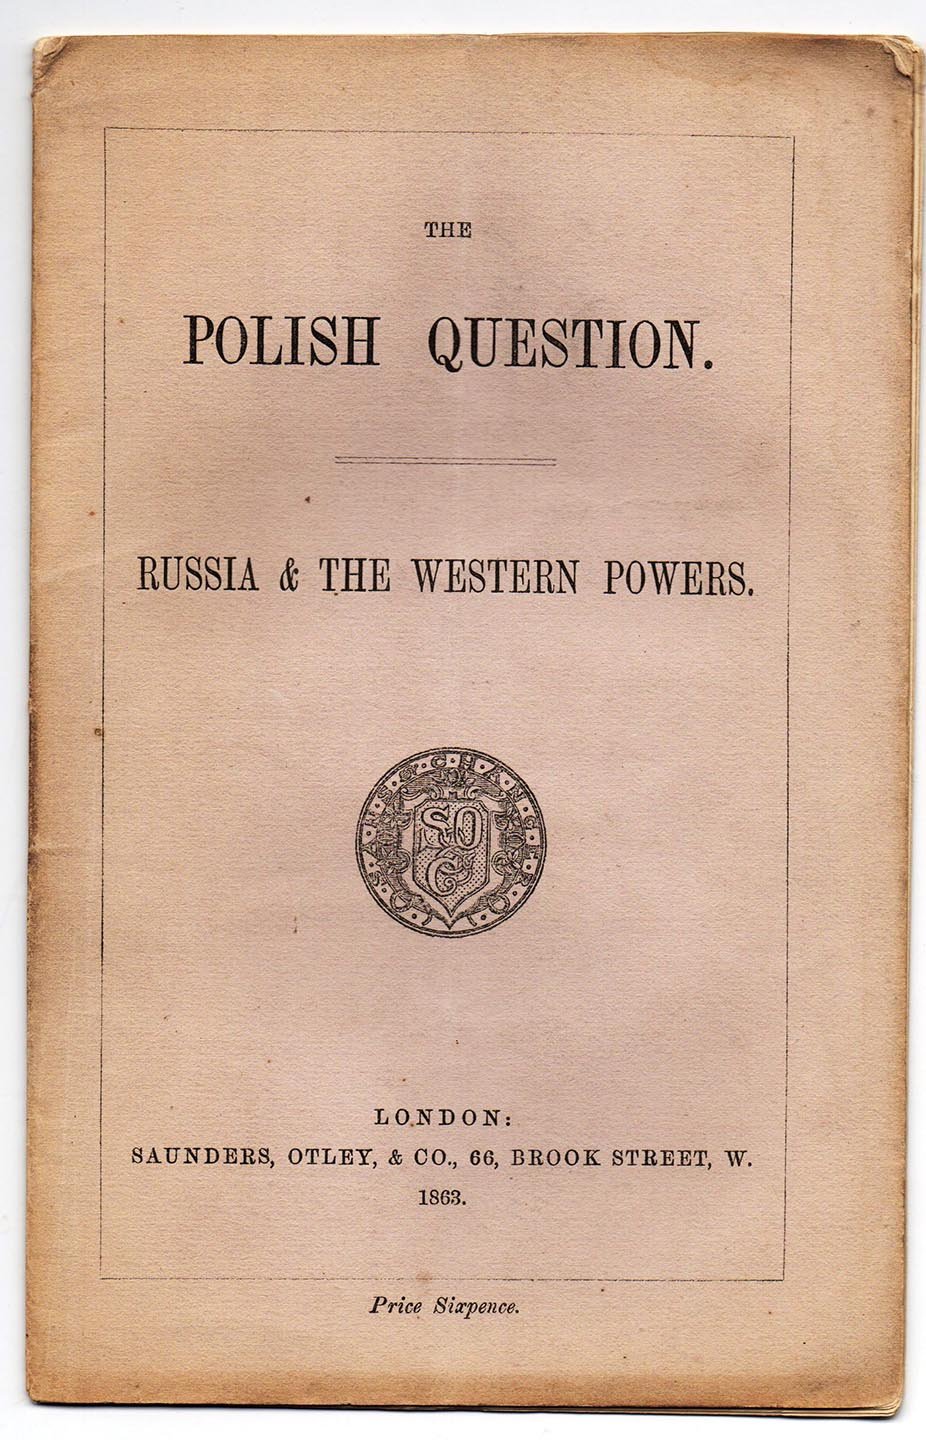 The Polish Question. Russia & The Western Powers